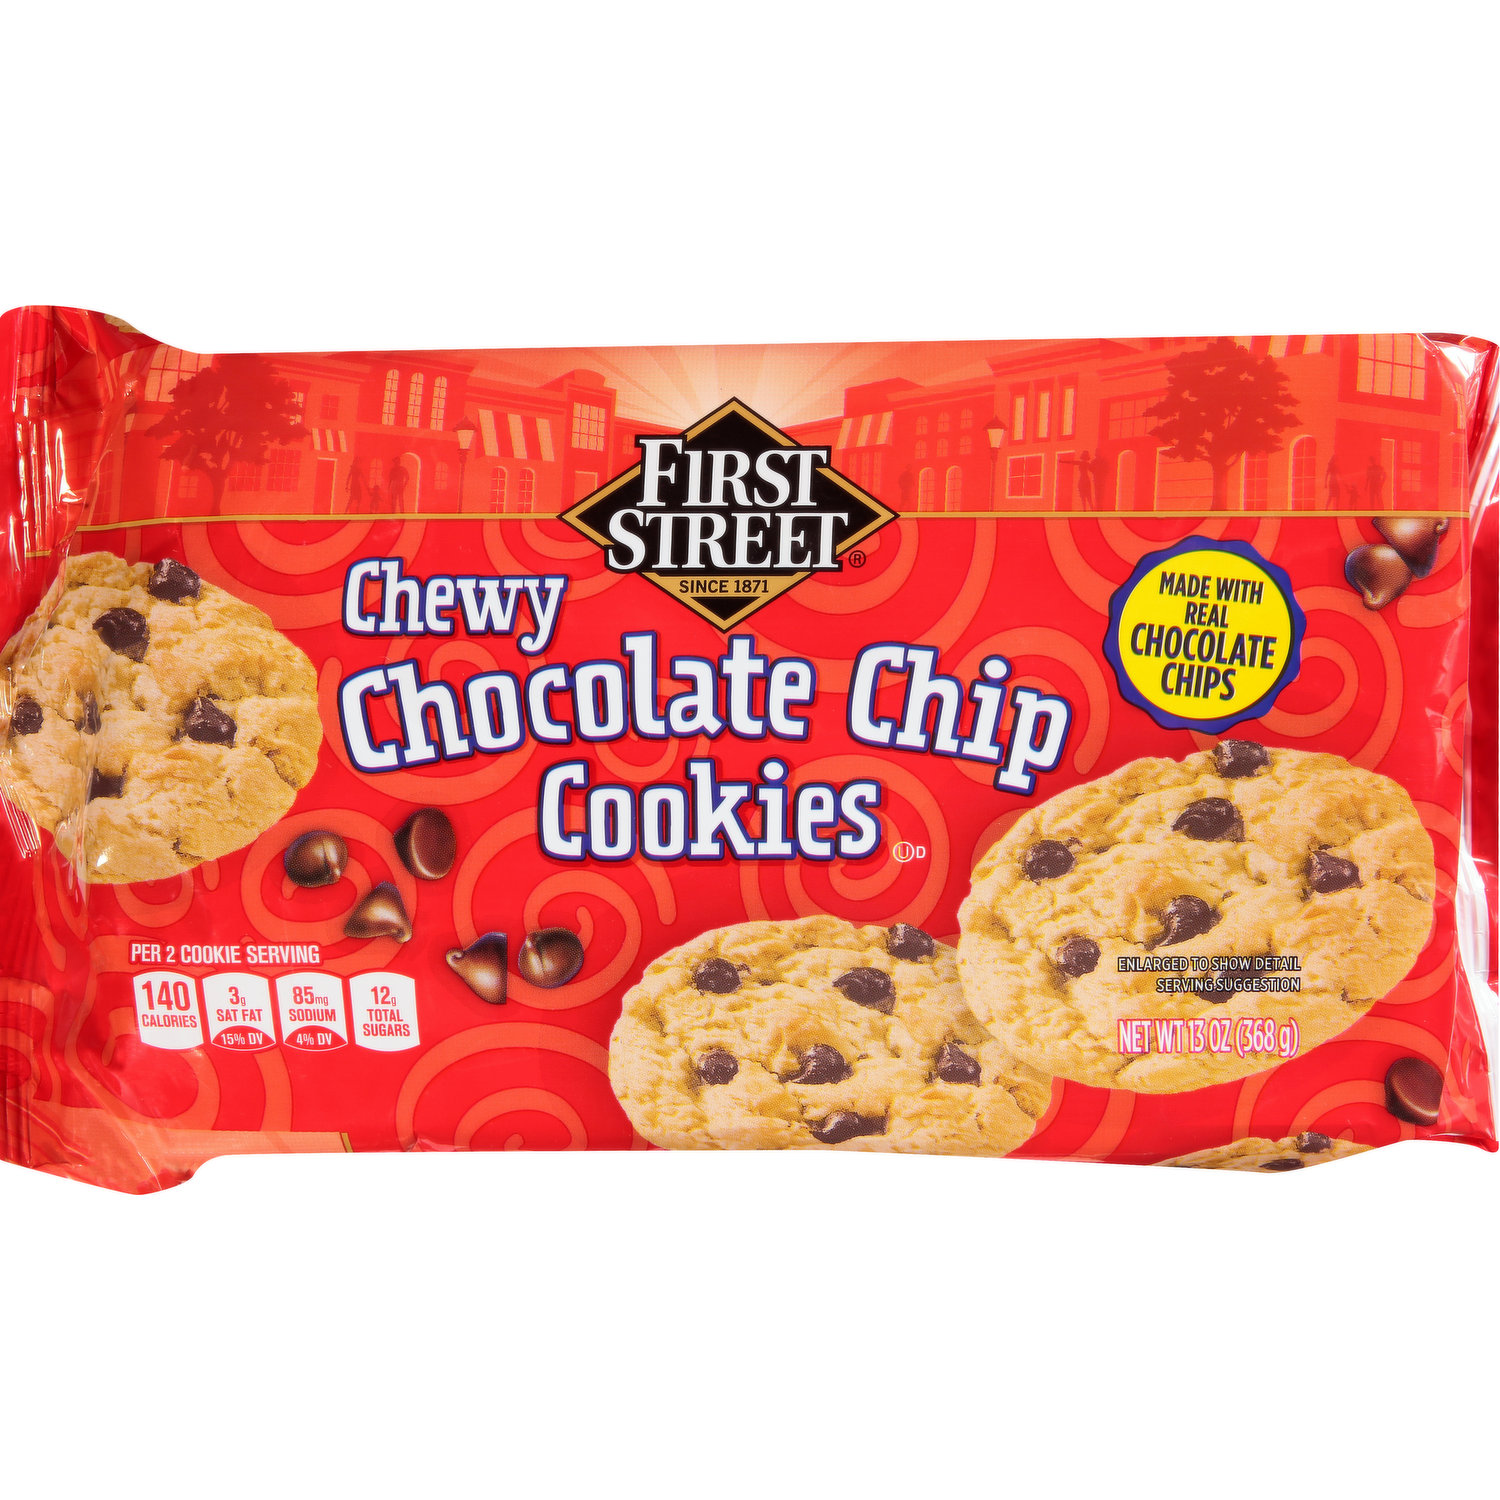 Chips Ahoy Chunky Chocolate Chip Cookies-11.75 oz.-12/Case